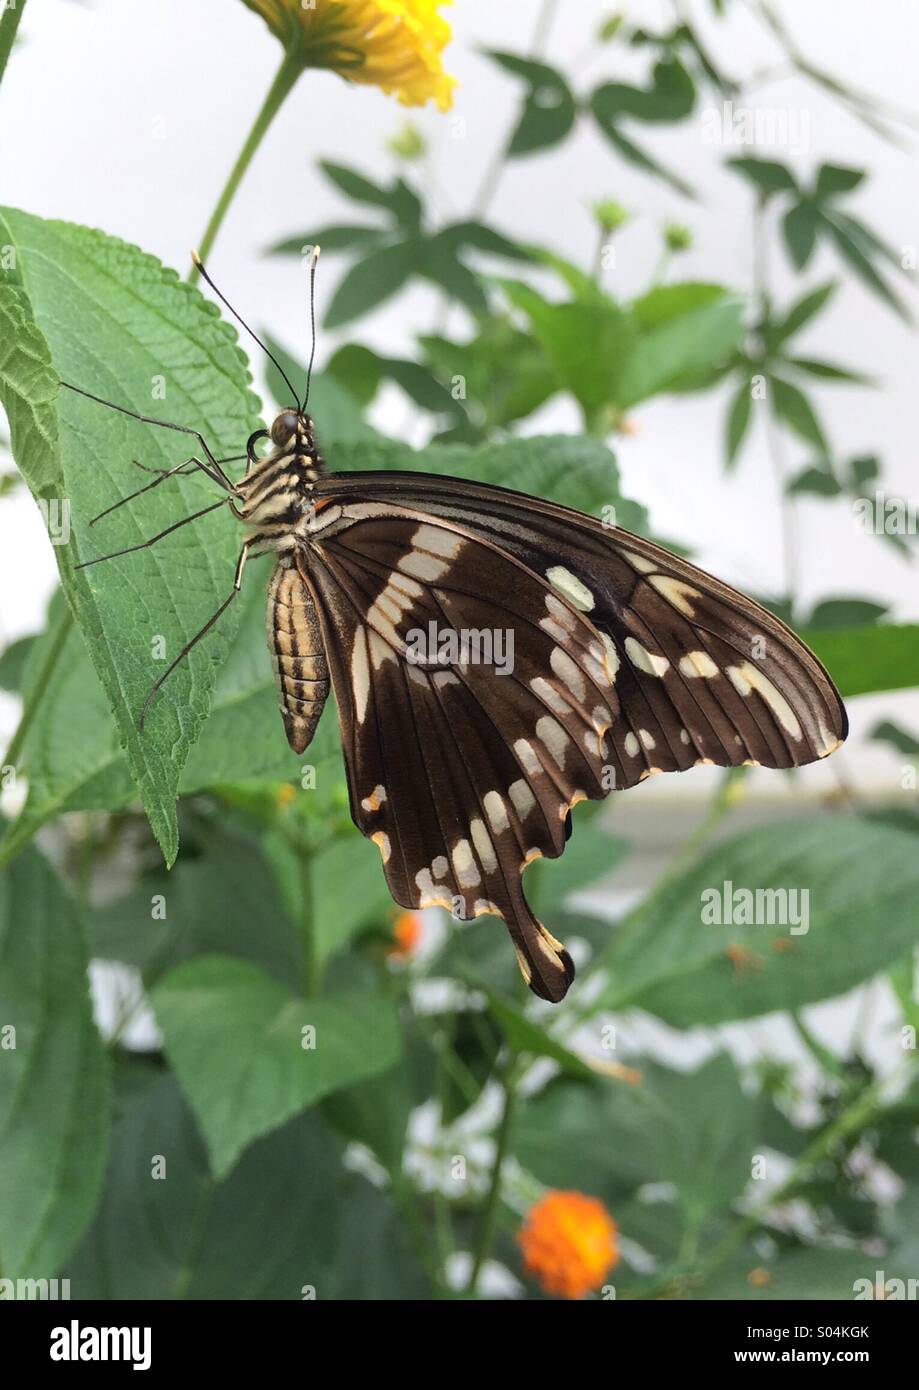 A swallowtail butterfly with wings closed on a leaf at the Butterfly exhibition at the Natural History Museum in London. Stock Photo